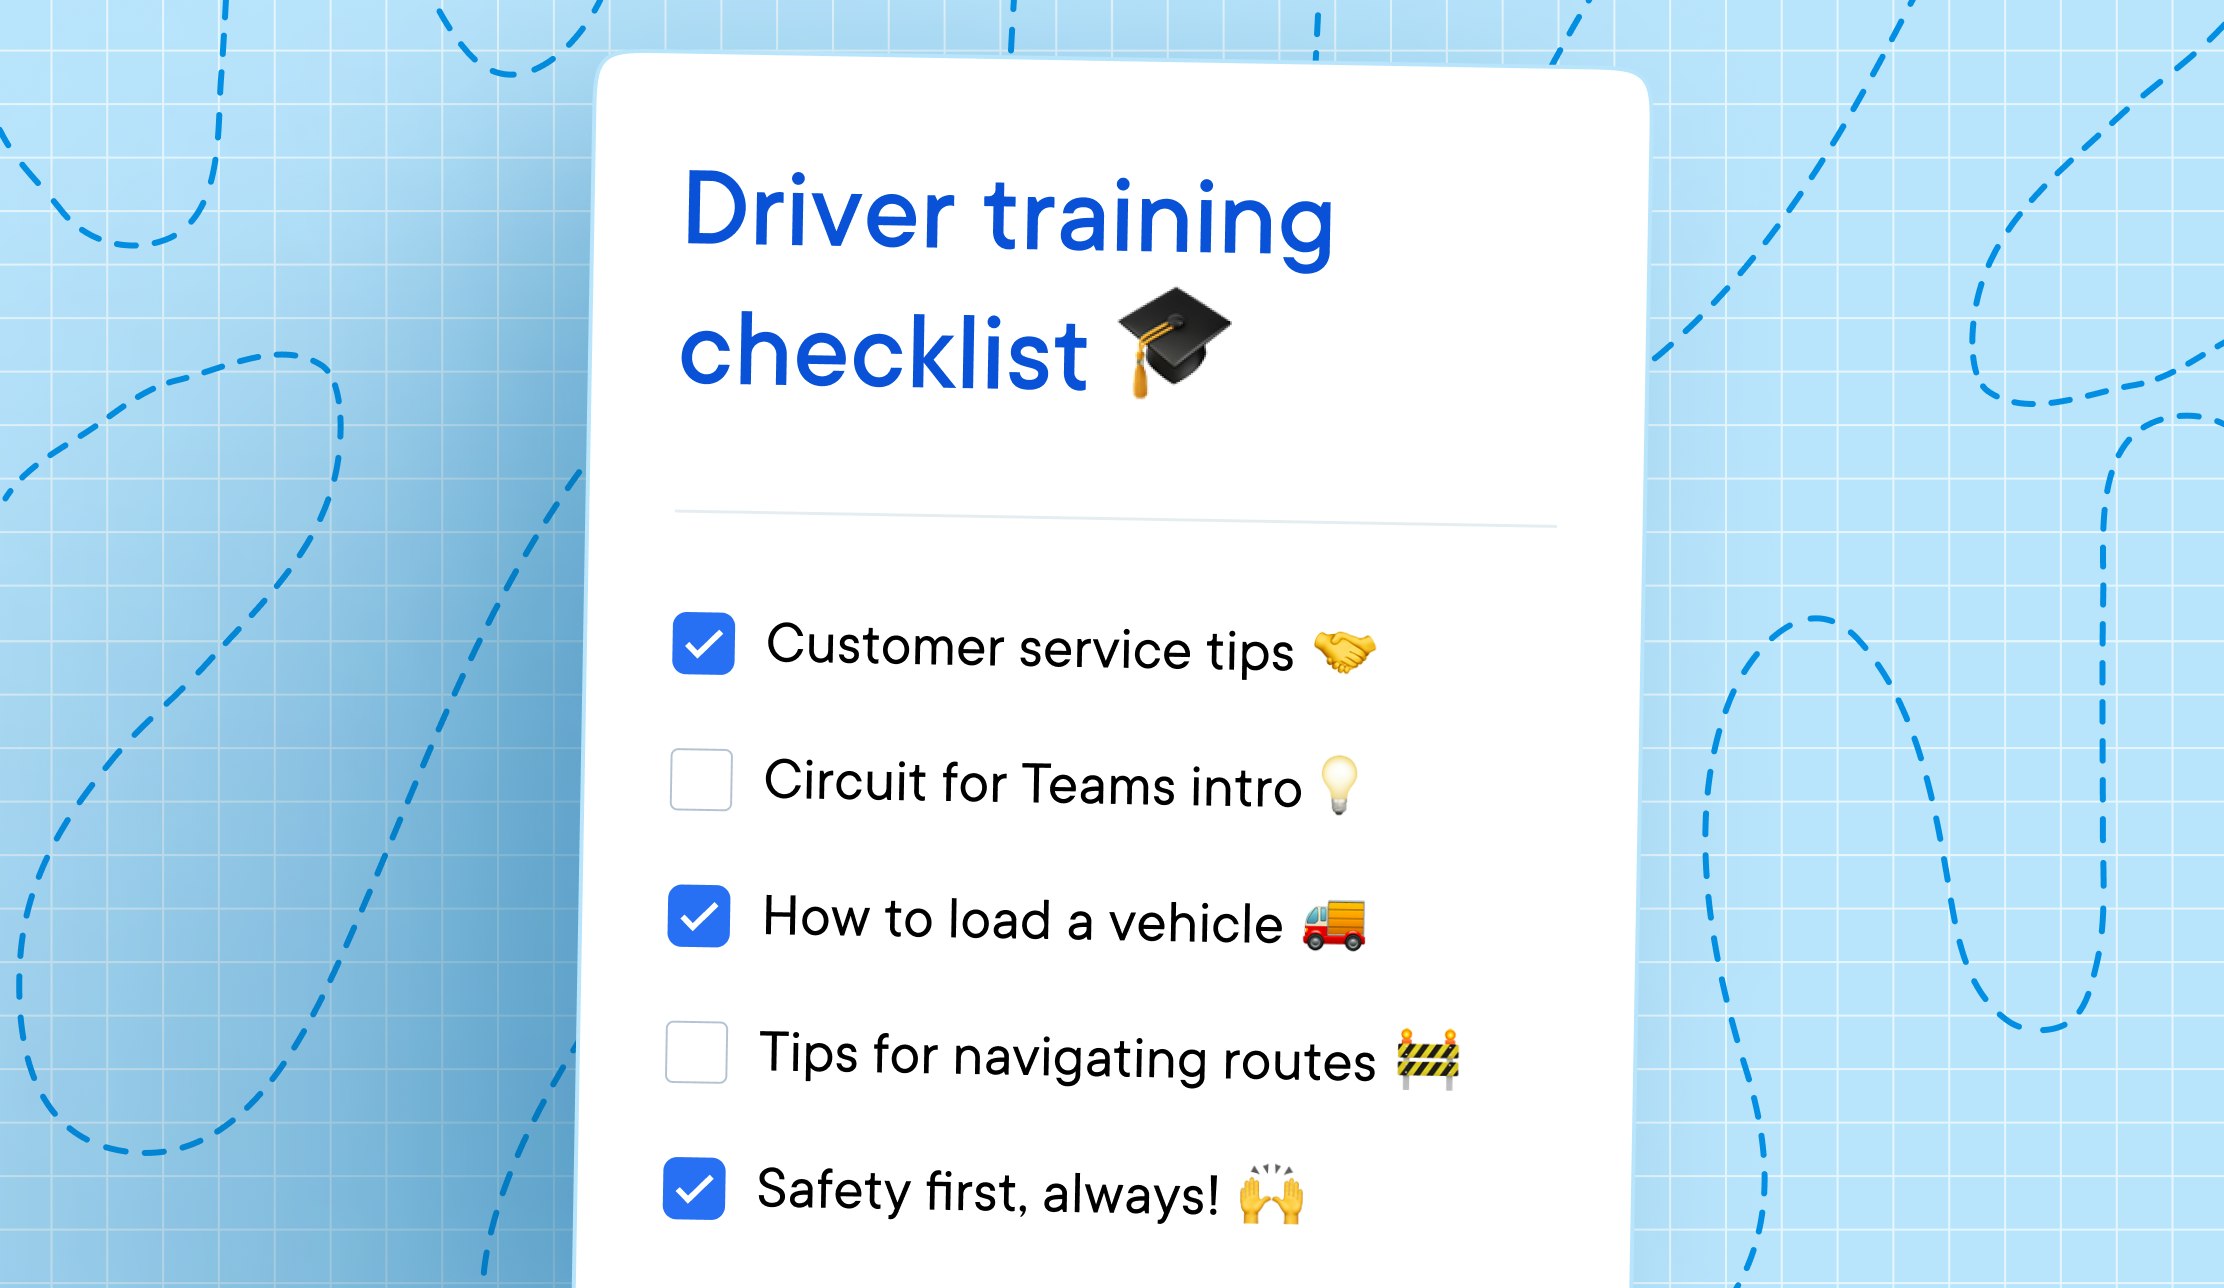 Driver training checklist: Customer service tips, Circuit for Teams intro, How to load a vehicle, Tips for navigating routes, Safety first.